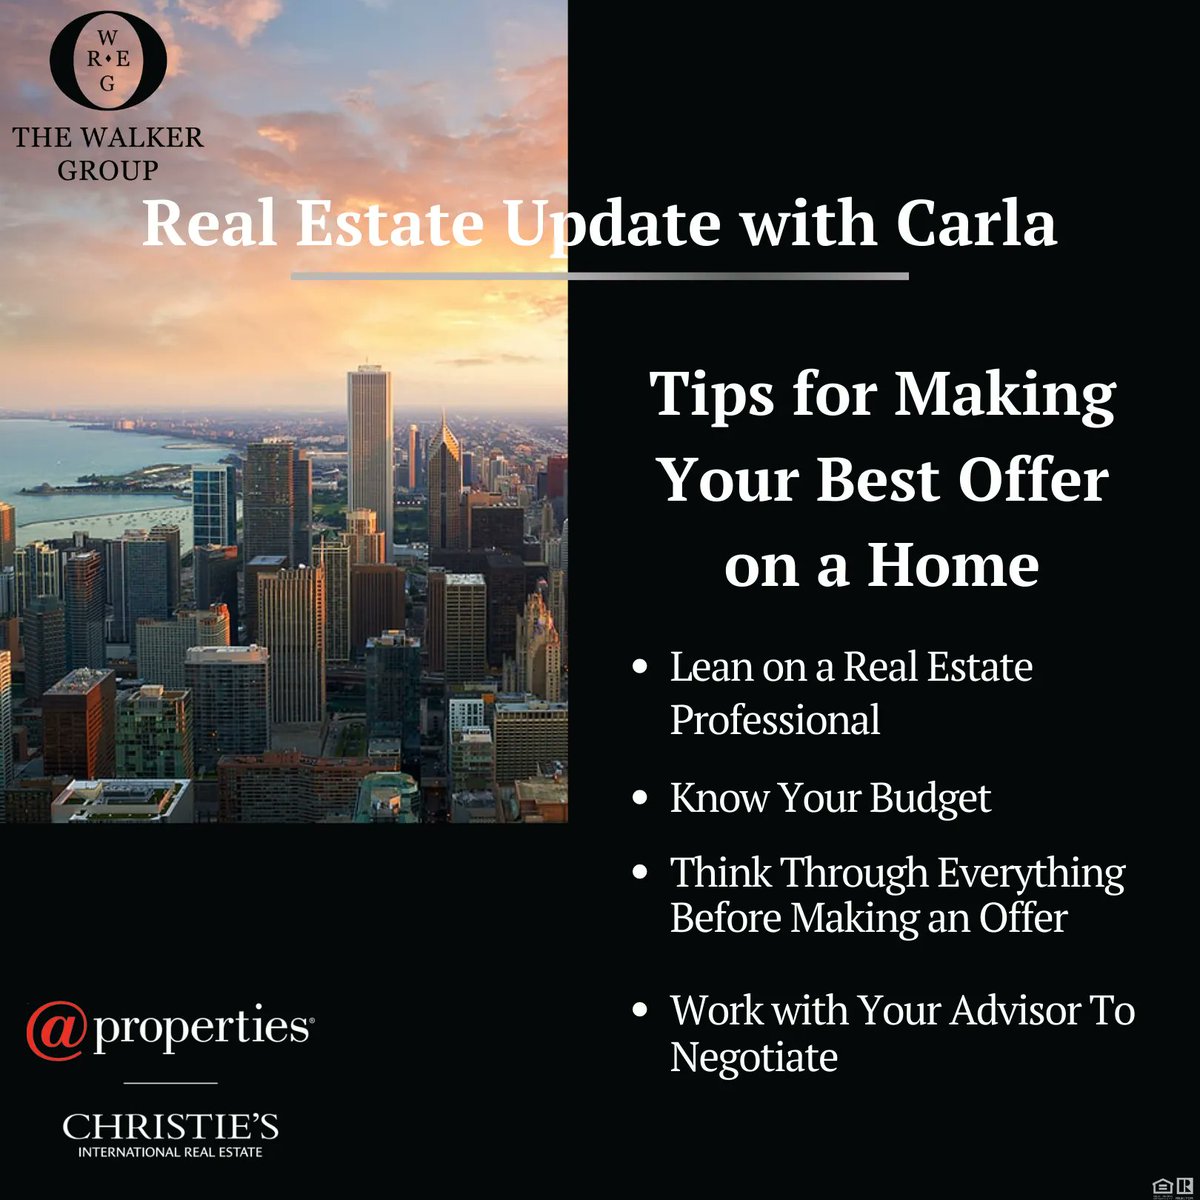 Here's our latest Market Update!

As you search for your dream home, remember these four tips to make your best offer! The final tip is to work with us so that we can make sure you get what you want!

buff.ly/3FiJgi0
#househunting #firsttimehomebuying #chicagorealestate